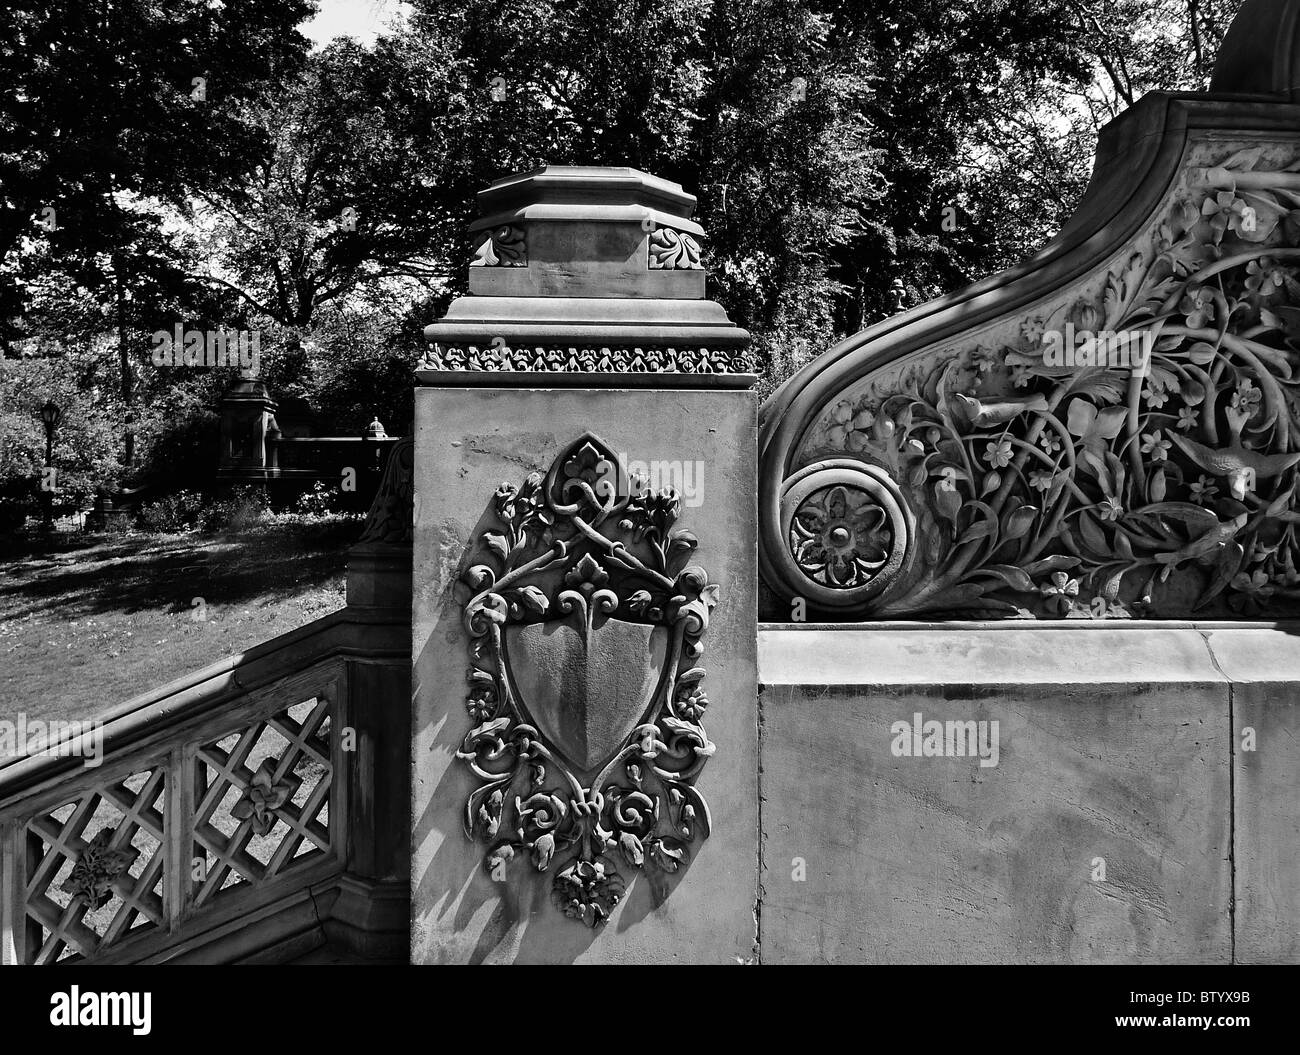 Historical architectural details, Central Park, New York City. Stock Photo